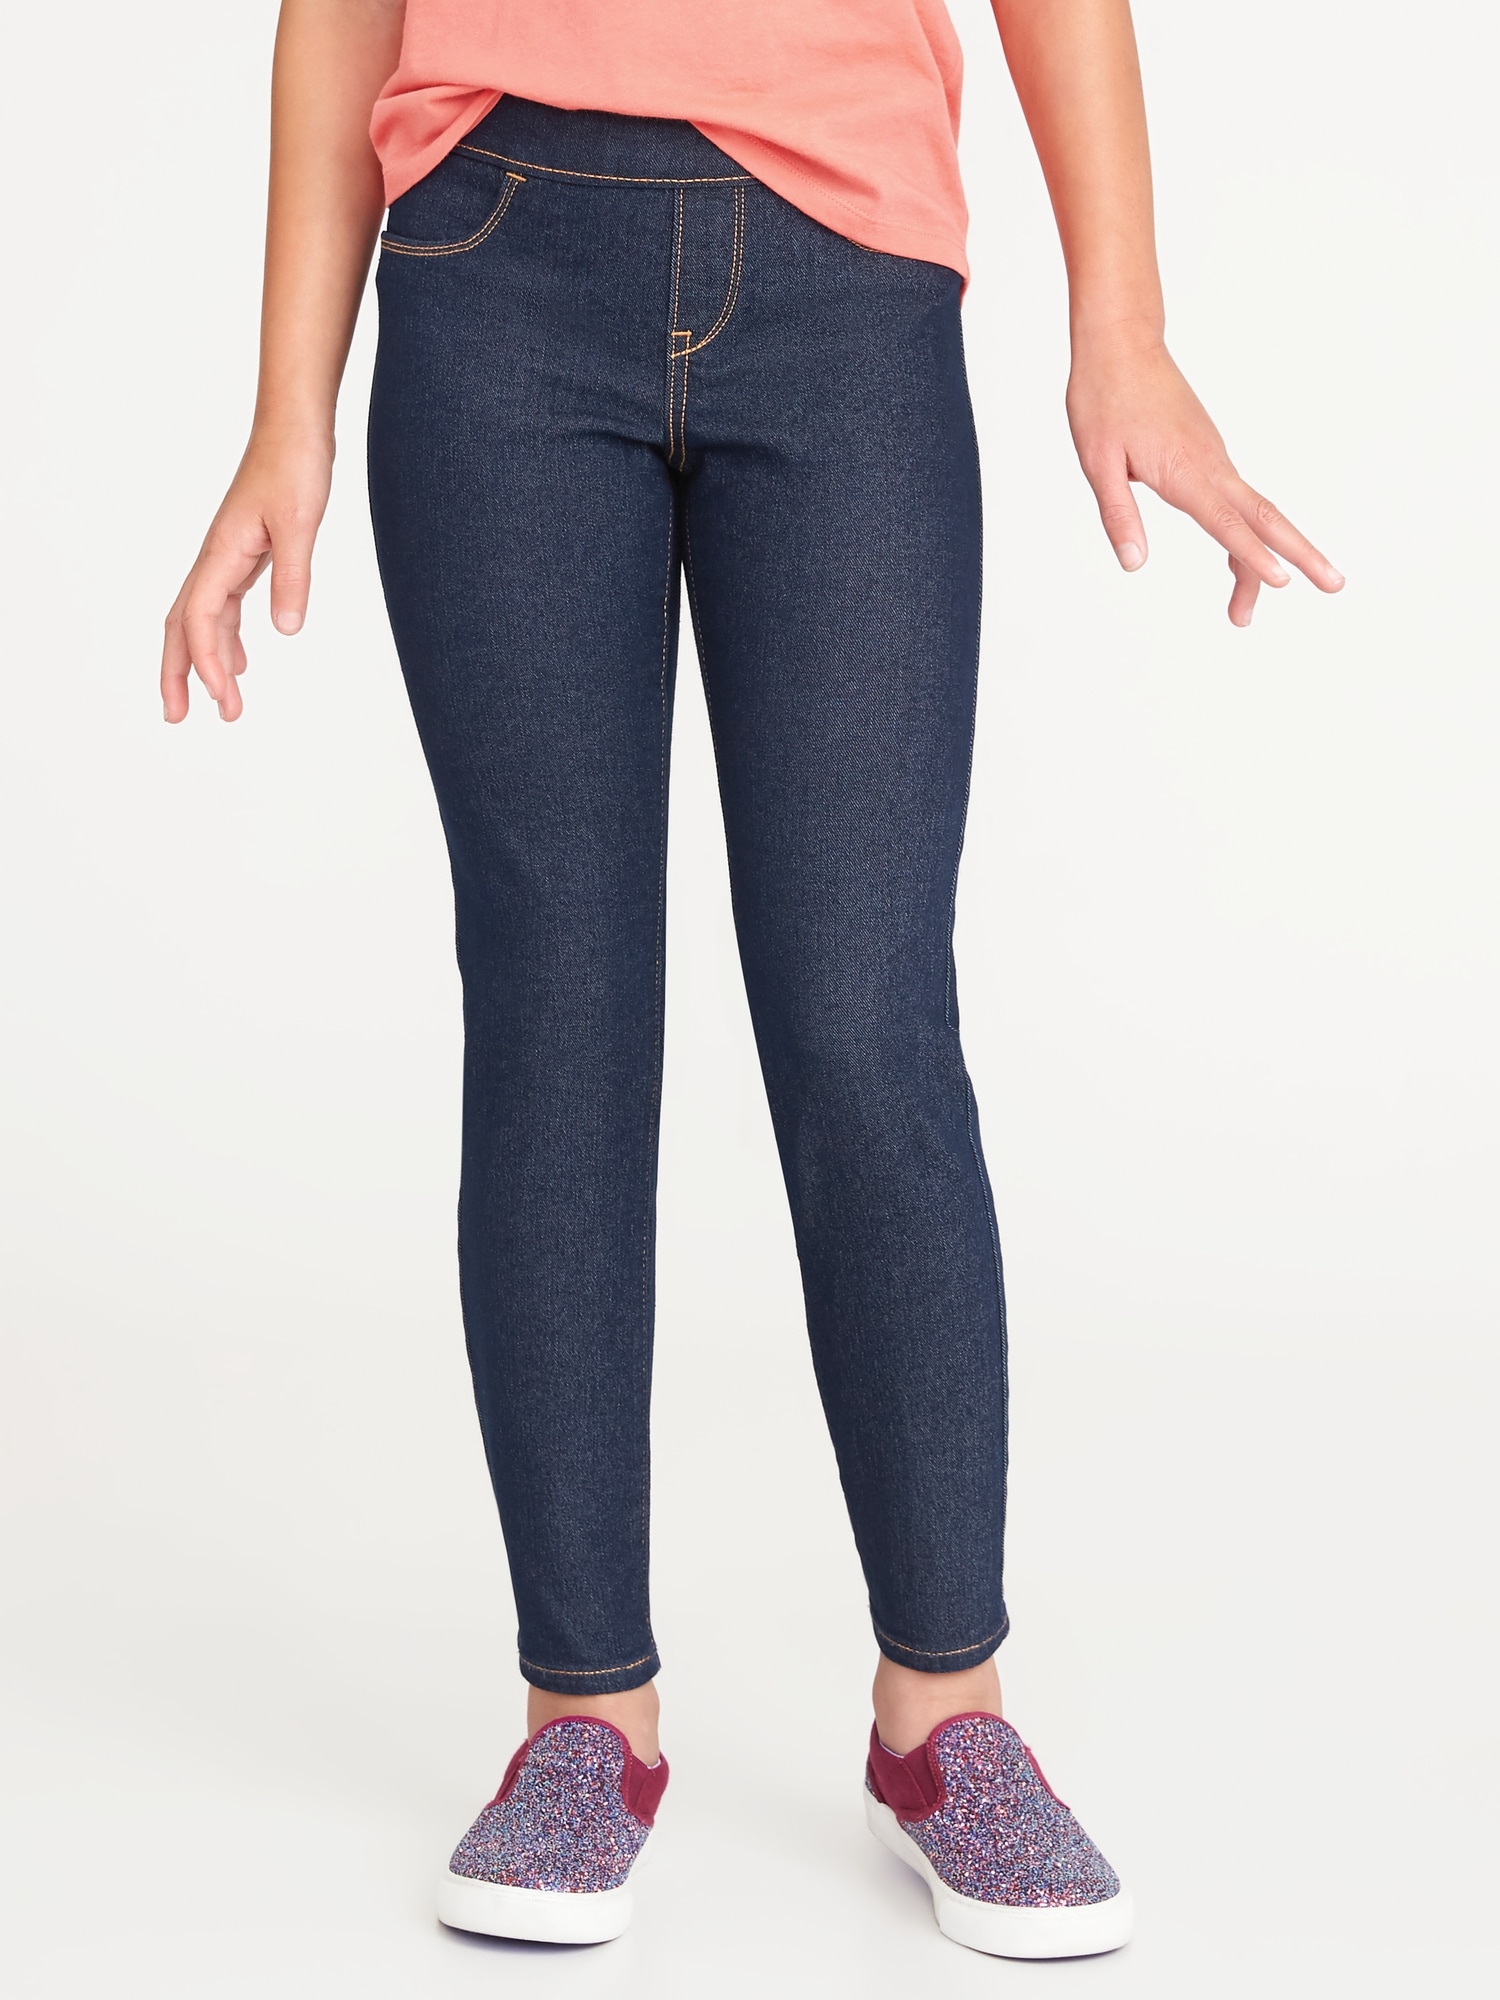 Skinny Built-In Tough Pull-On Jeans for 